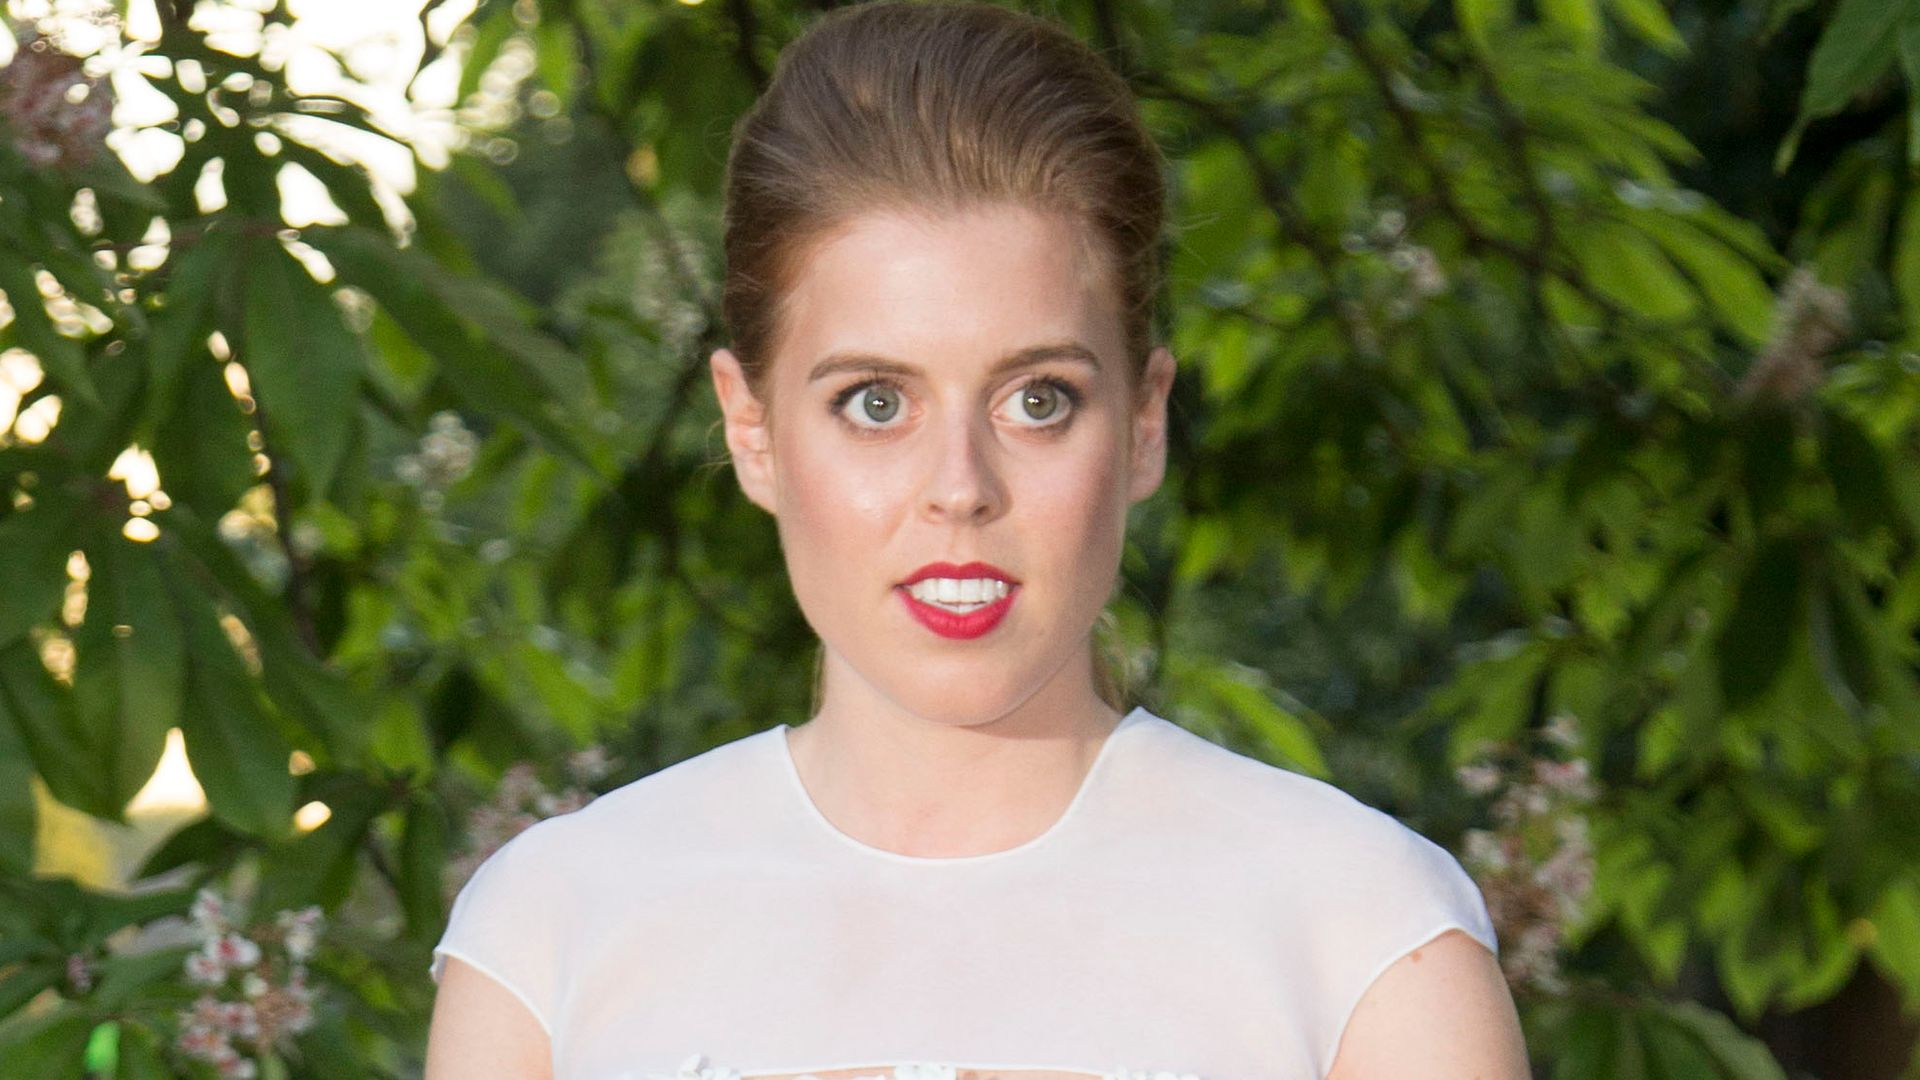  Princess Beatrice attends the annual Serpentine Galley Summer Party in white wedding dress in July 2014